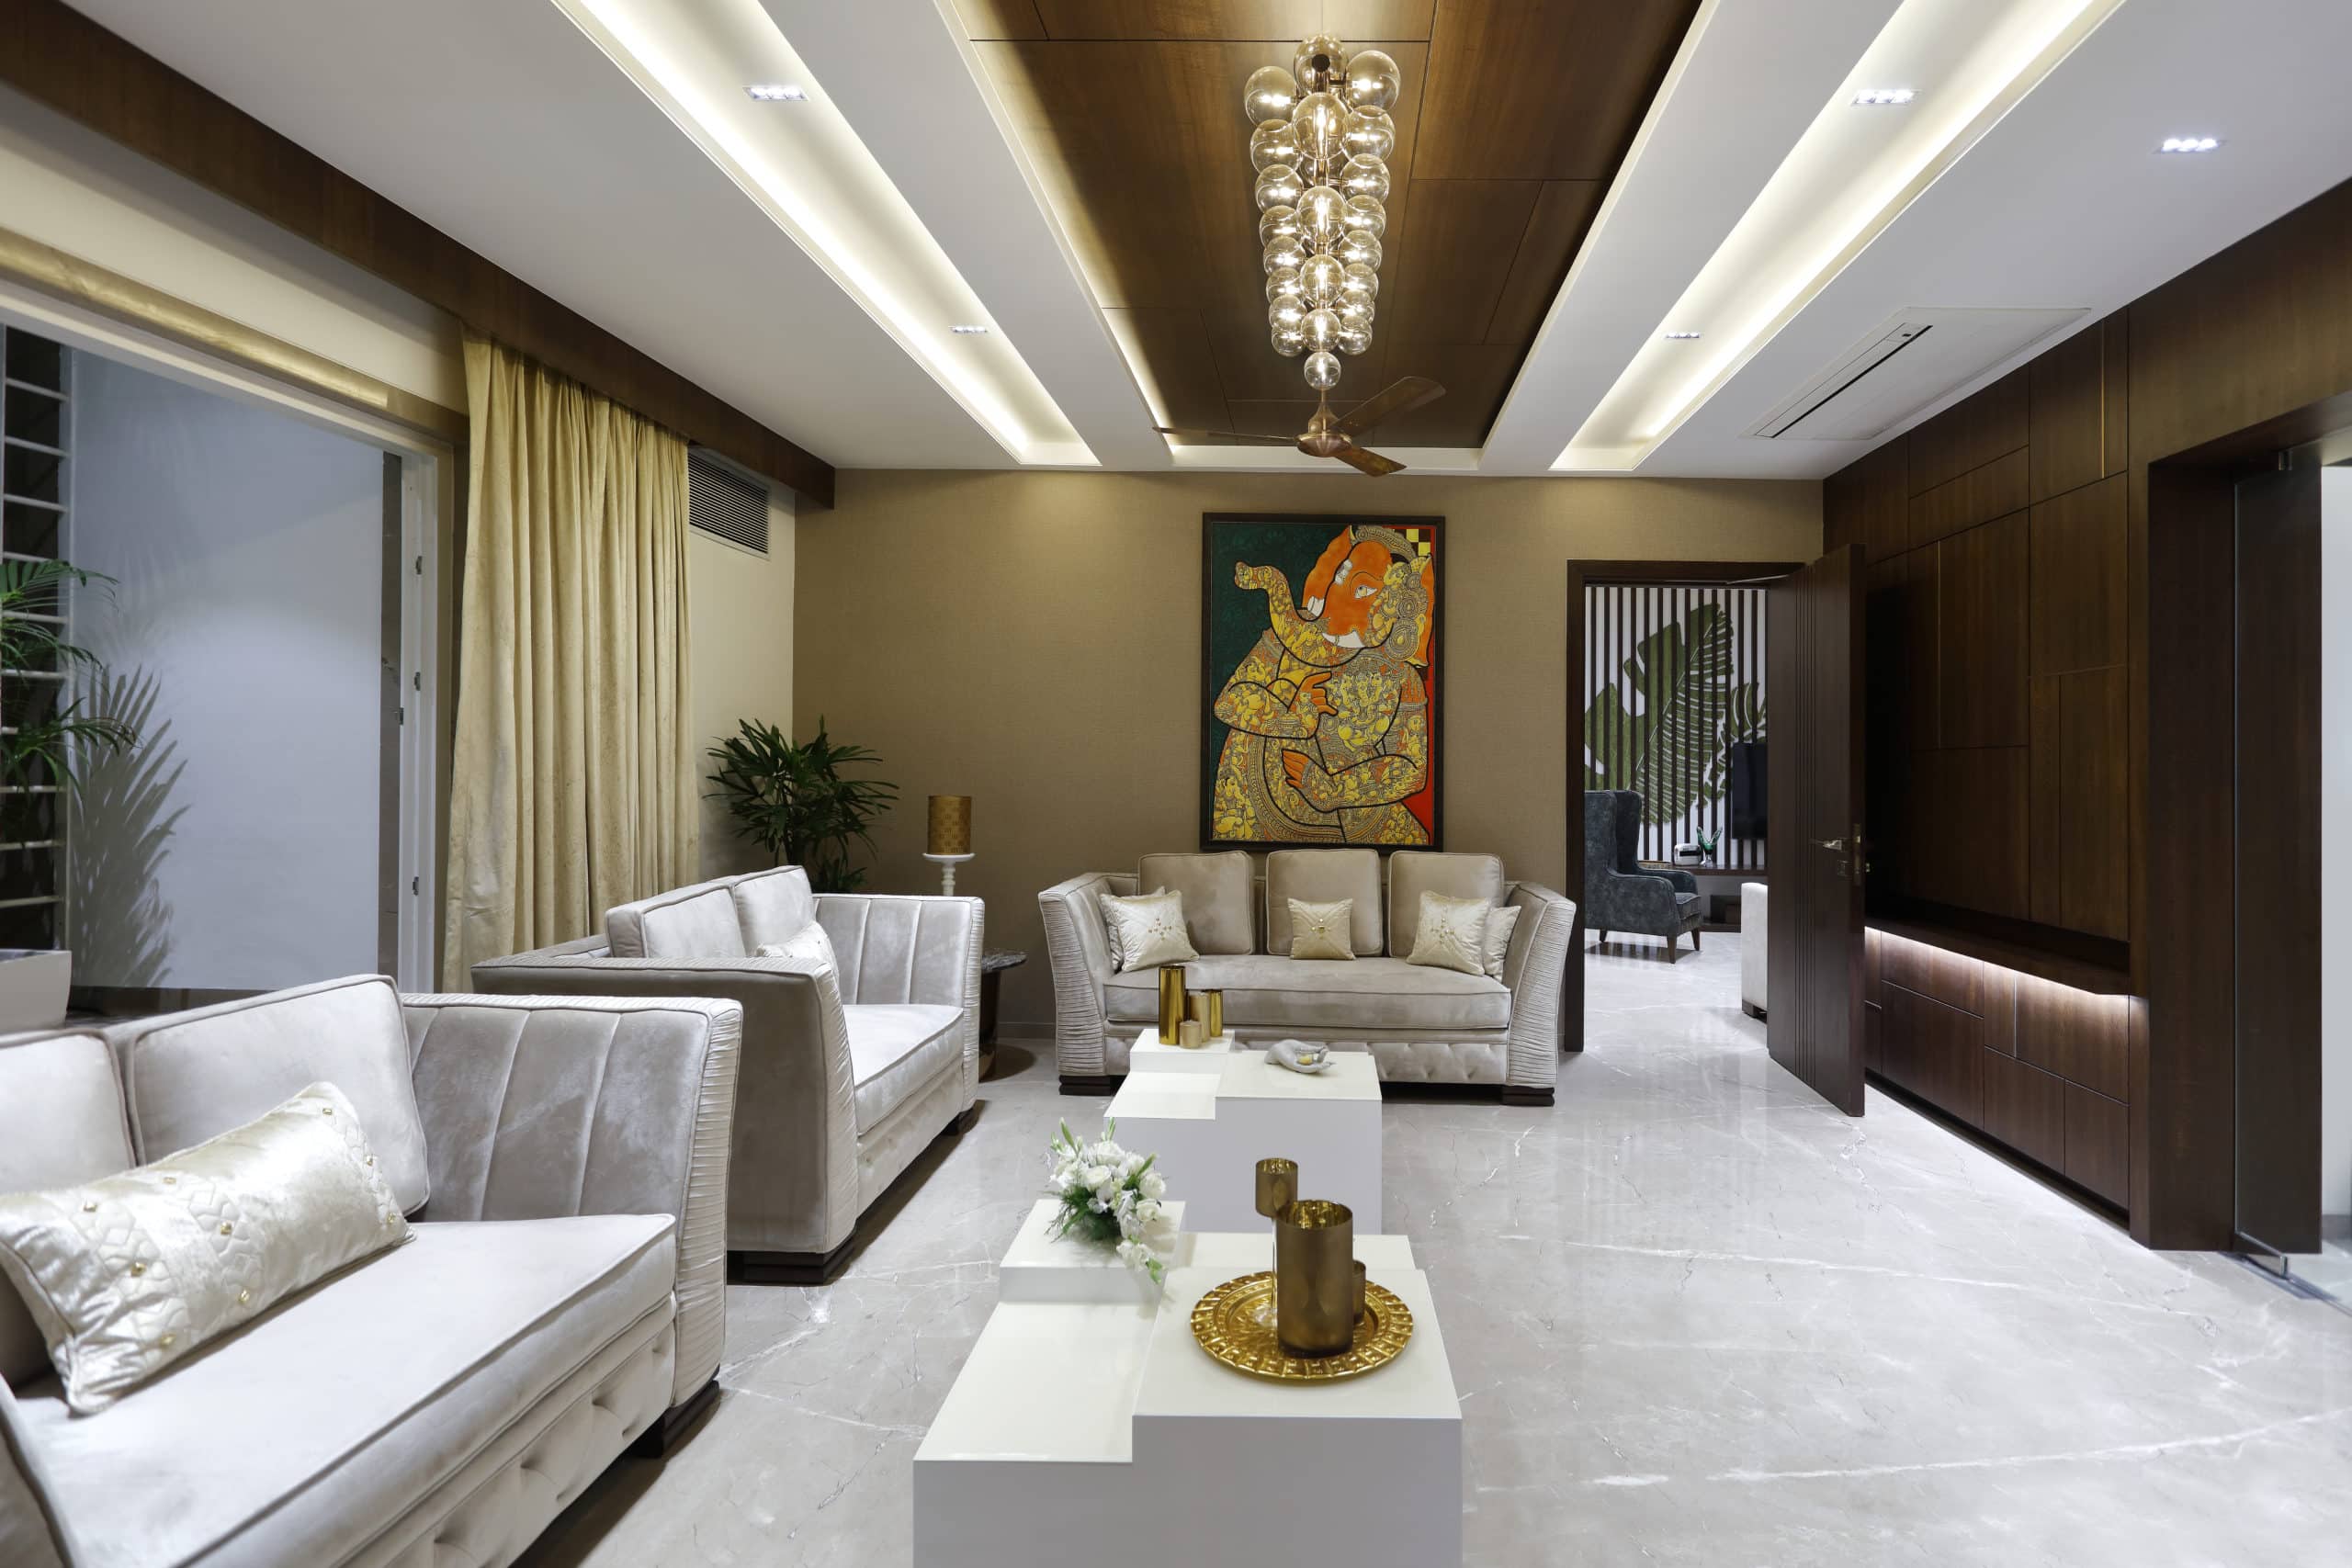 The Luxe Villa By Salankar Pashine And Associates | The Decor Journal India